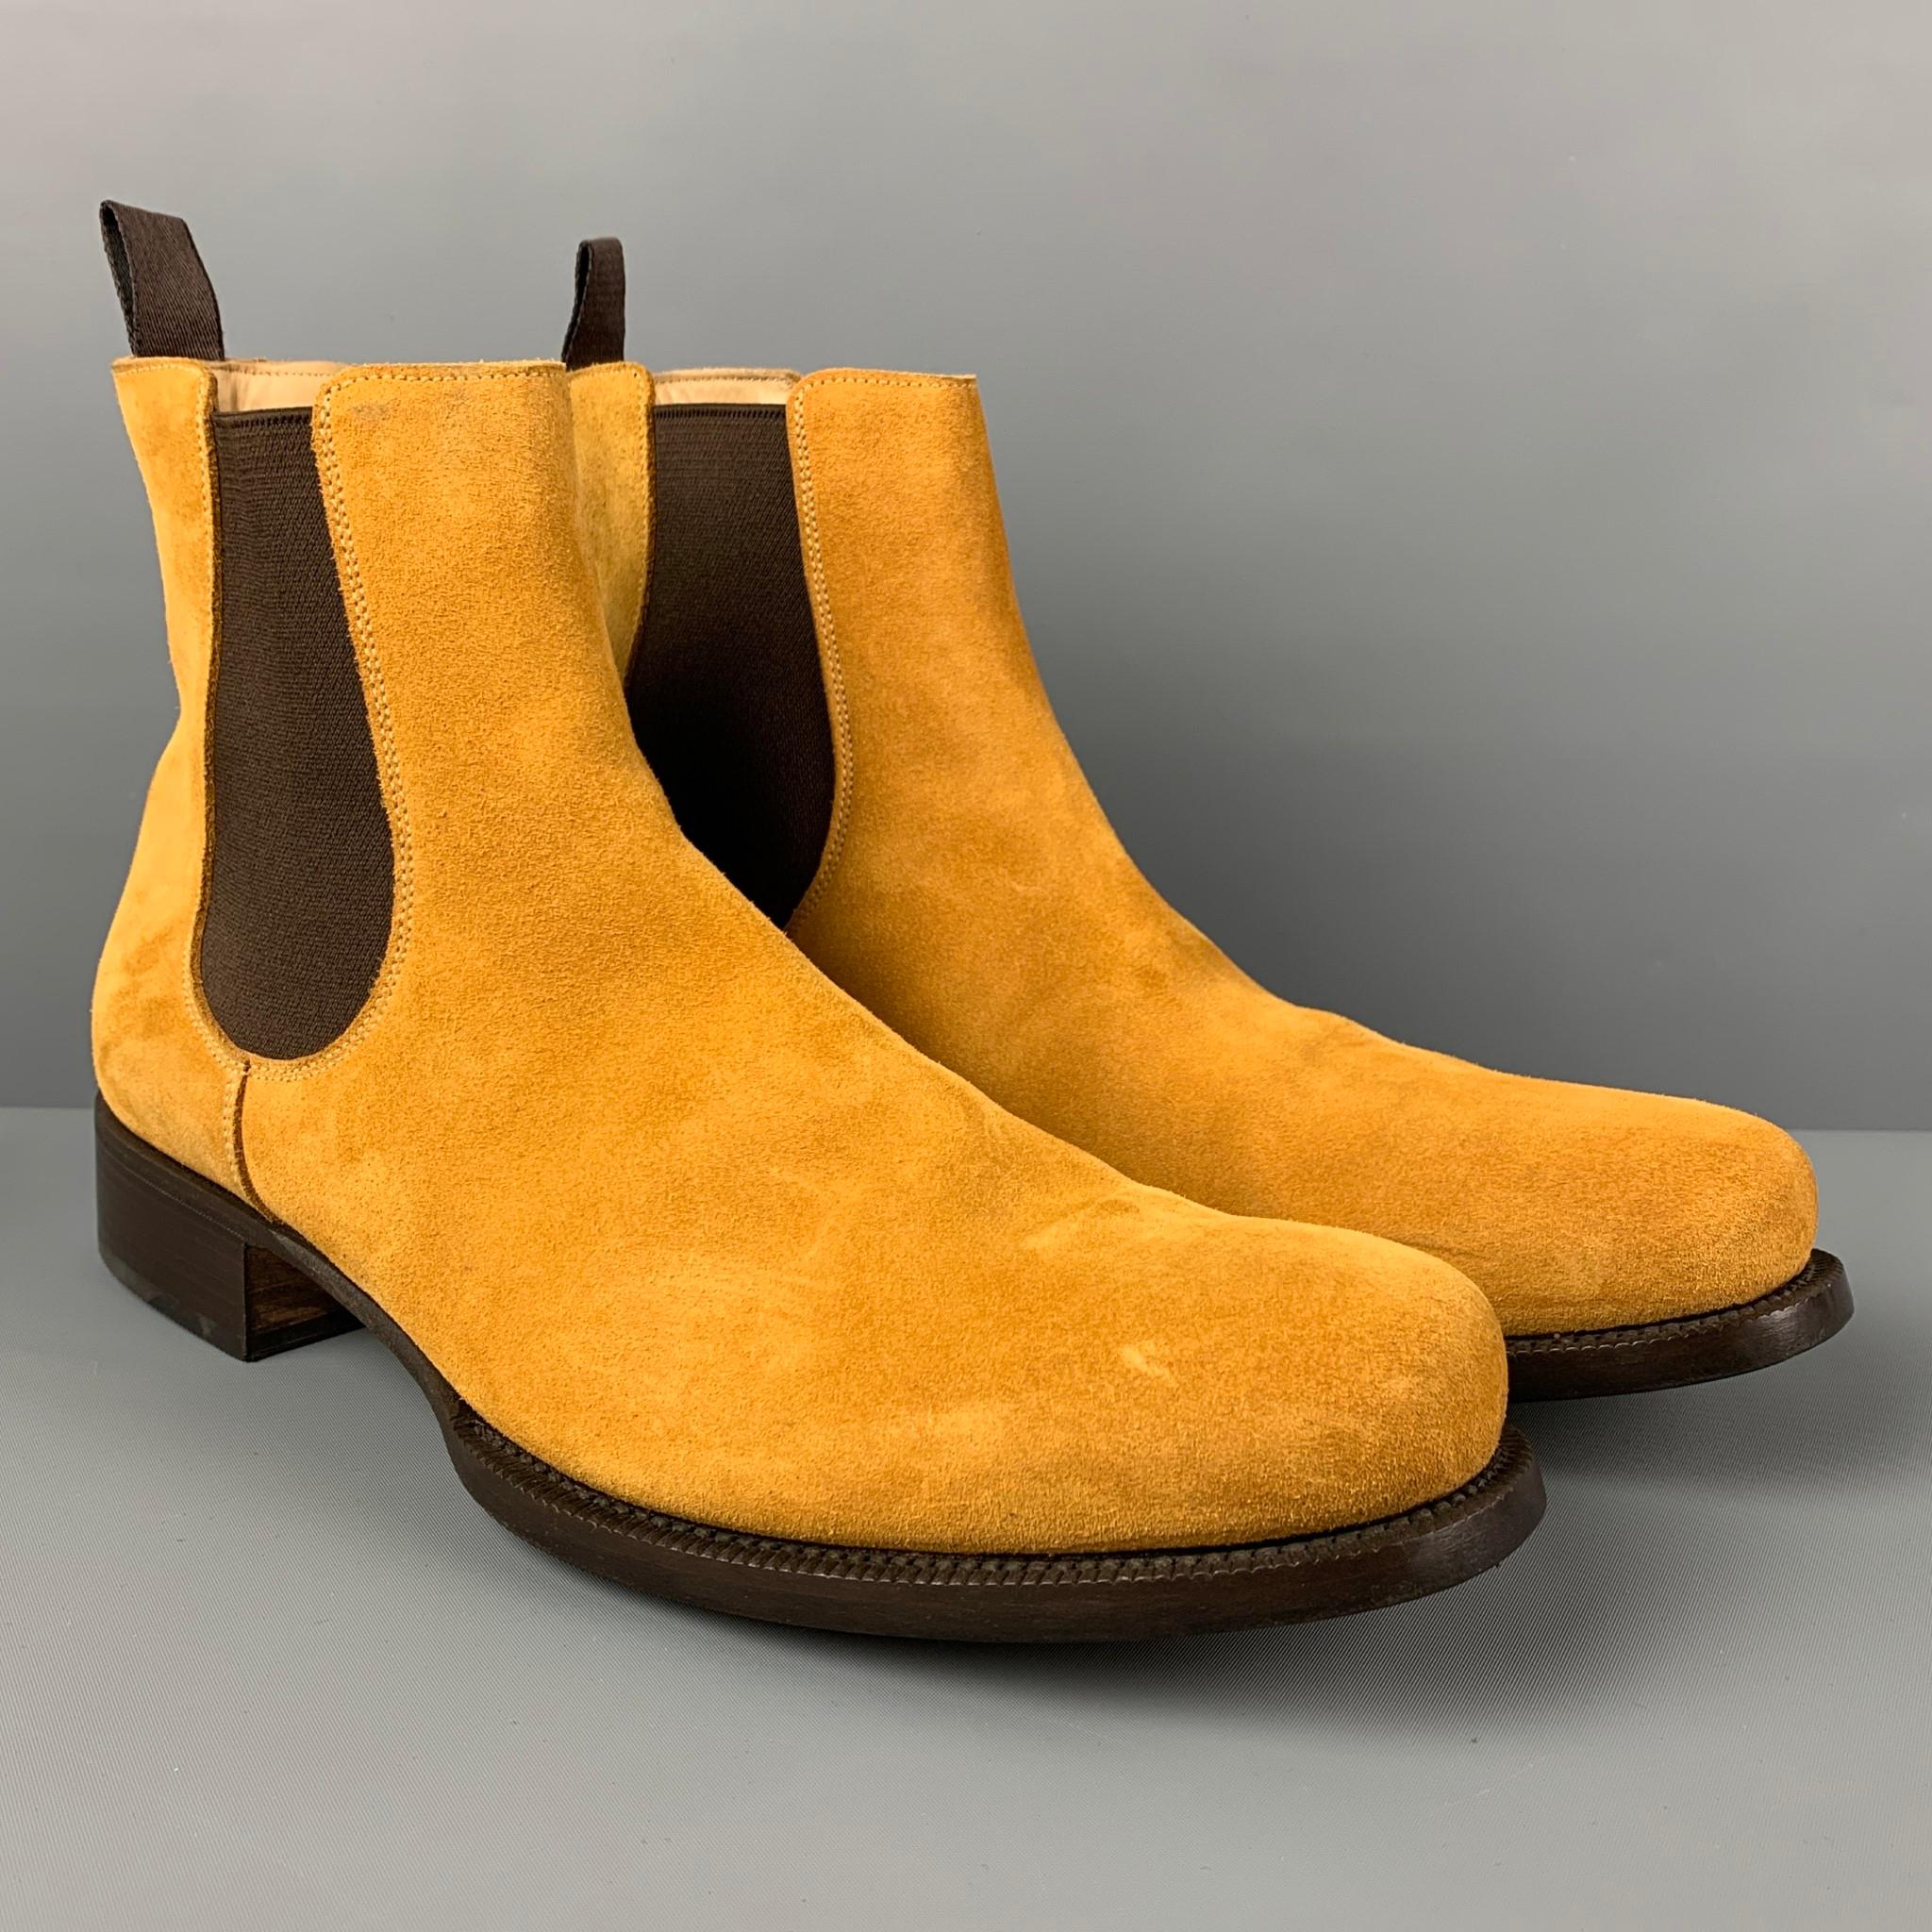 PRADA boots comes in a natural suede featuring a chelsea style and a round toe. Includes box. Made in Italy. 

Very Good Pre-Owned Condition.
Marked: 11

Measurements:

Length: 13 in.
Width: 4.25 in.
Height: 6.25 in. 